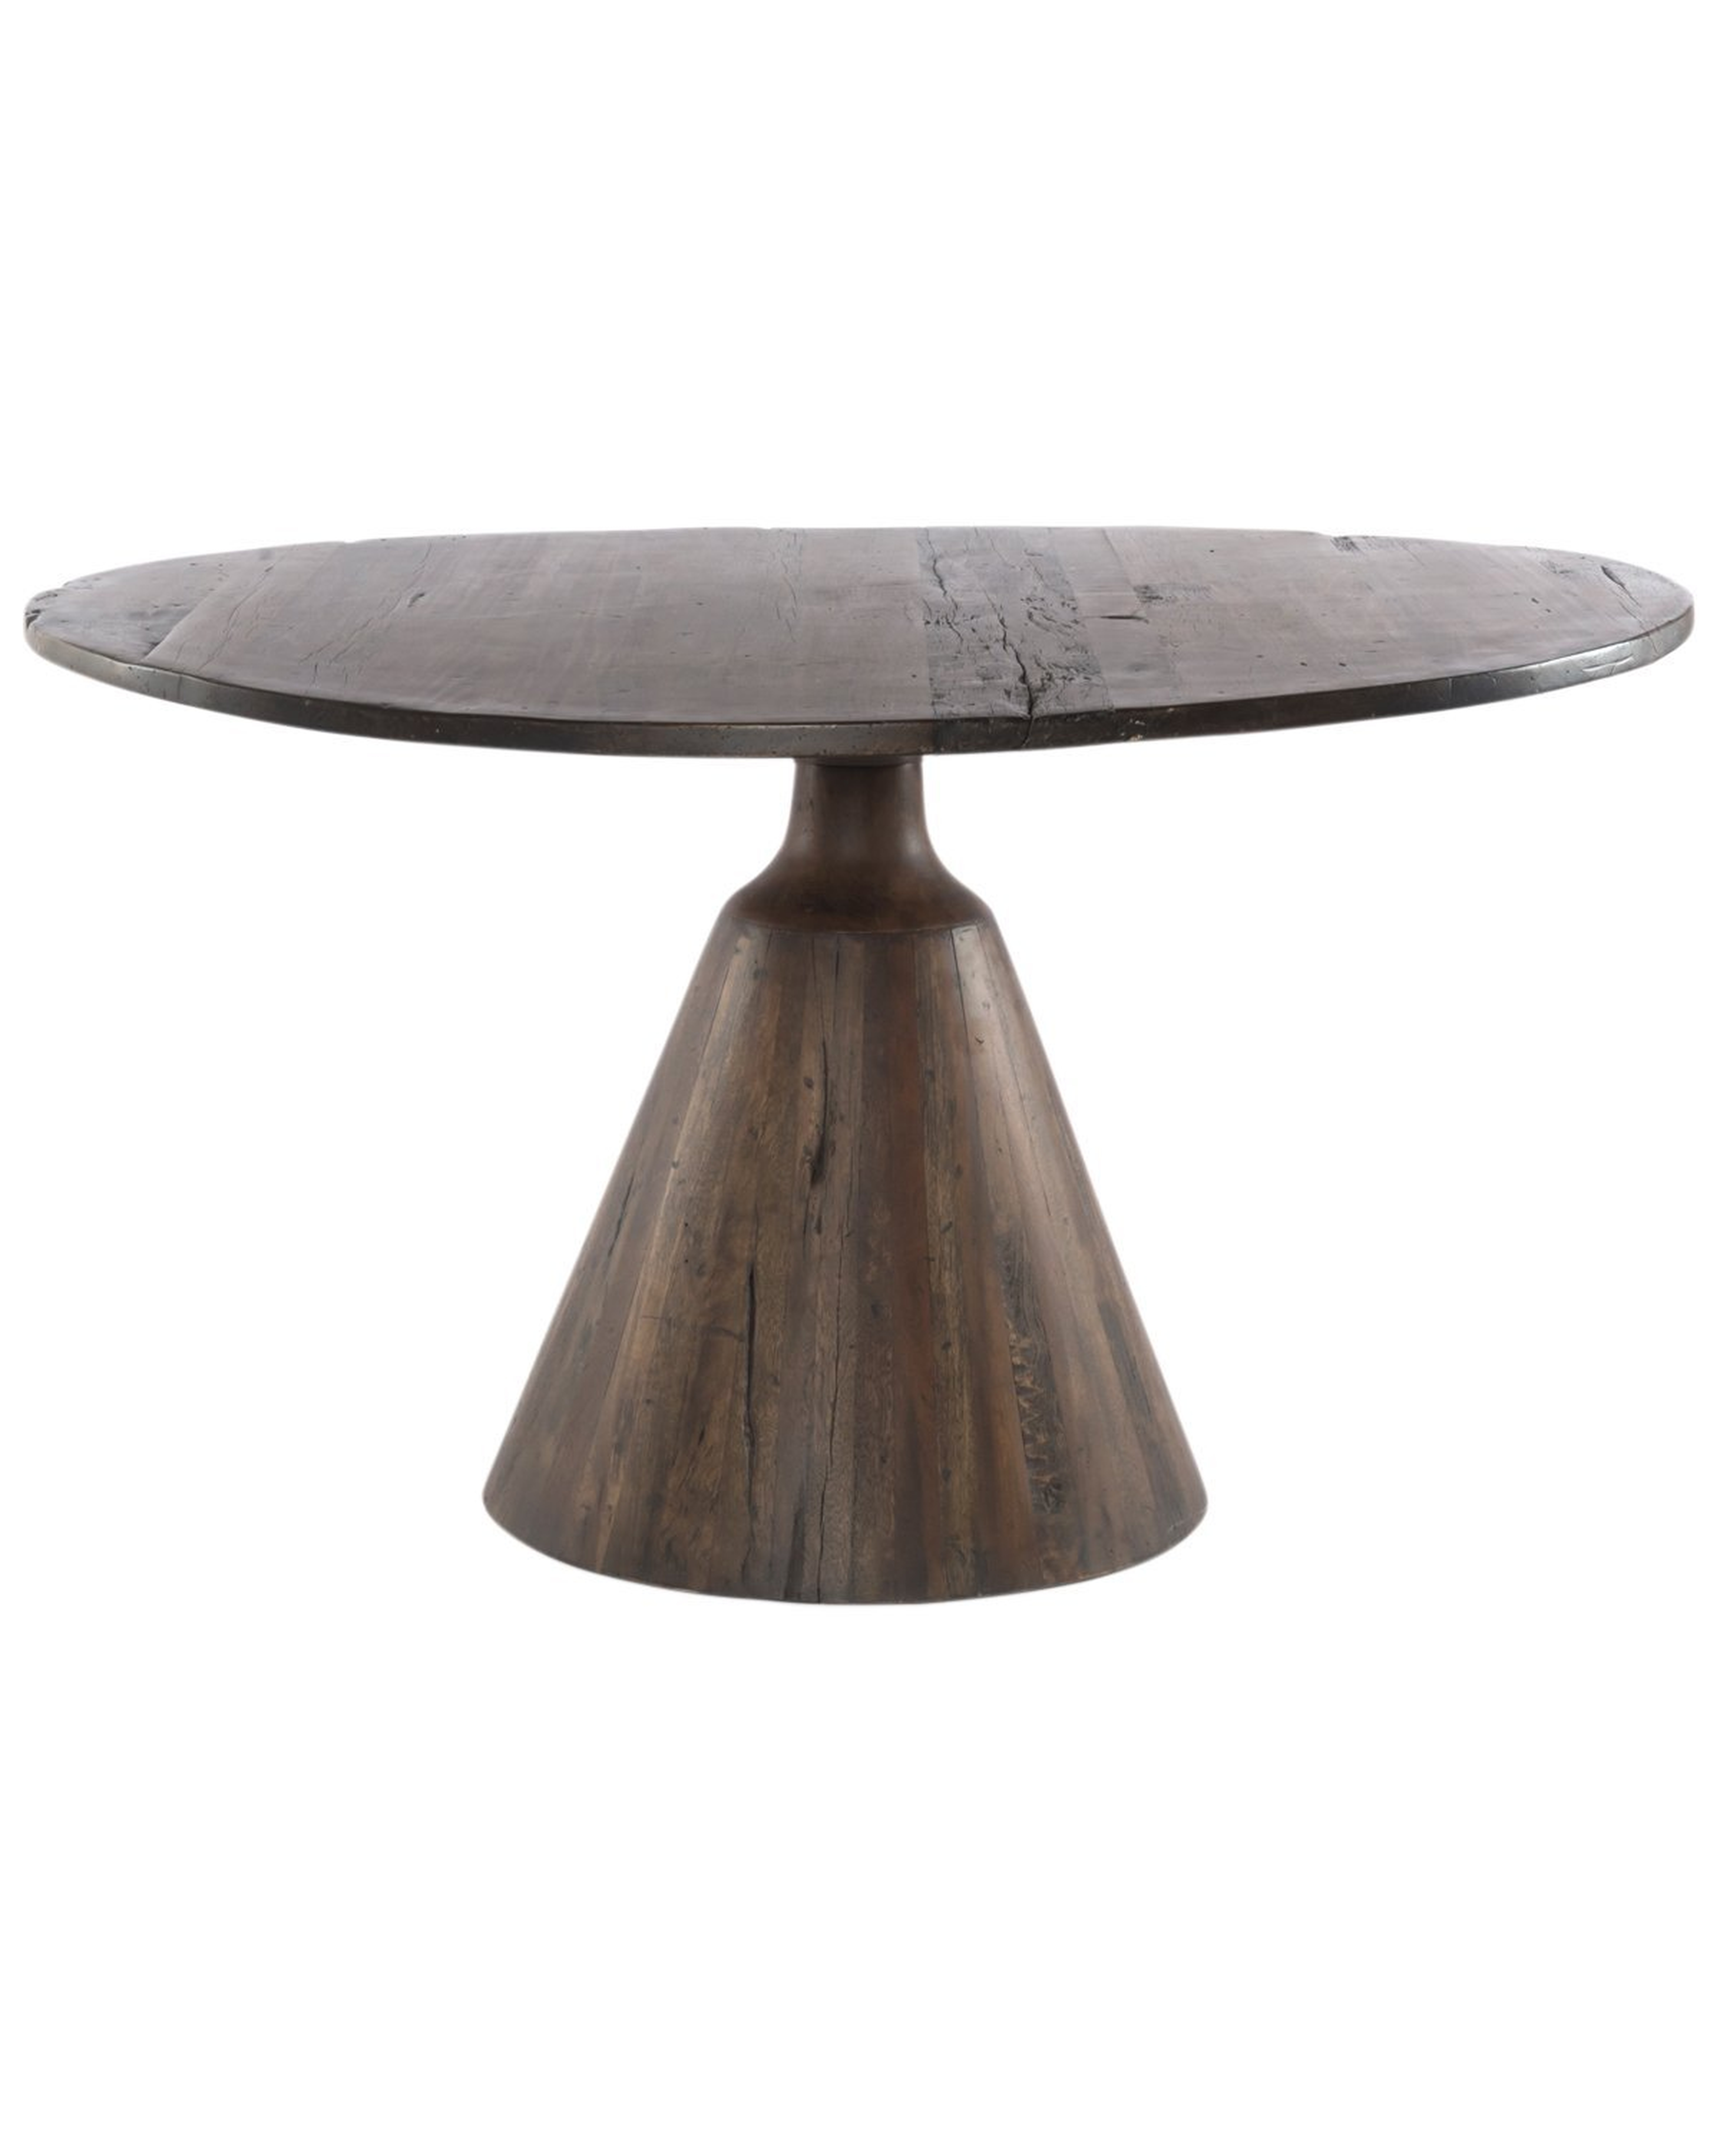 BLAKE DINING TABLE - McGee & Co.